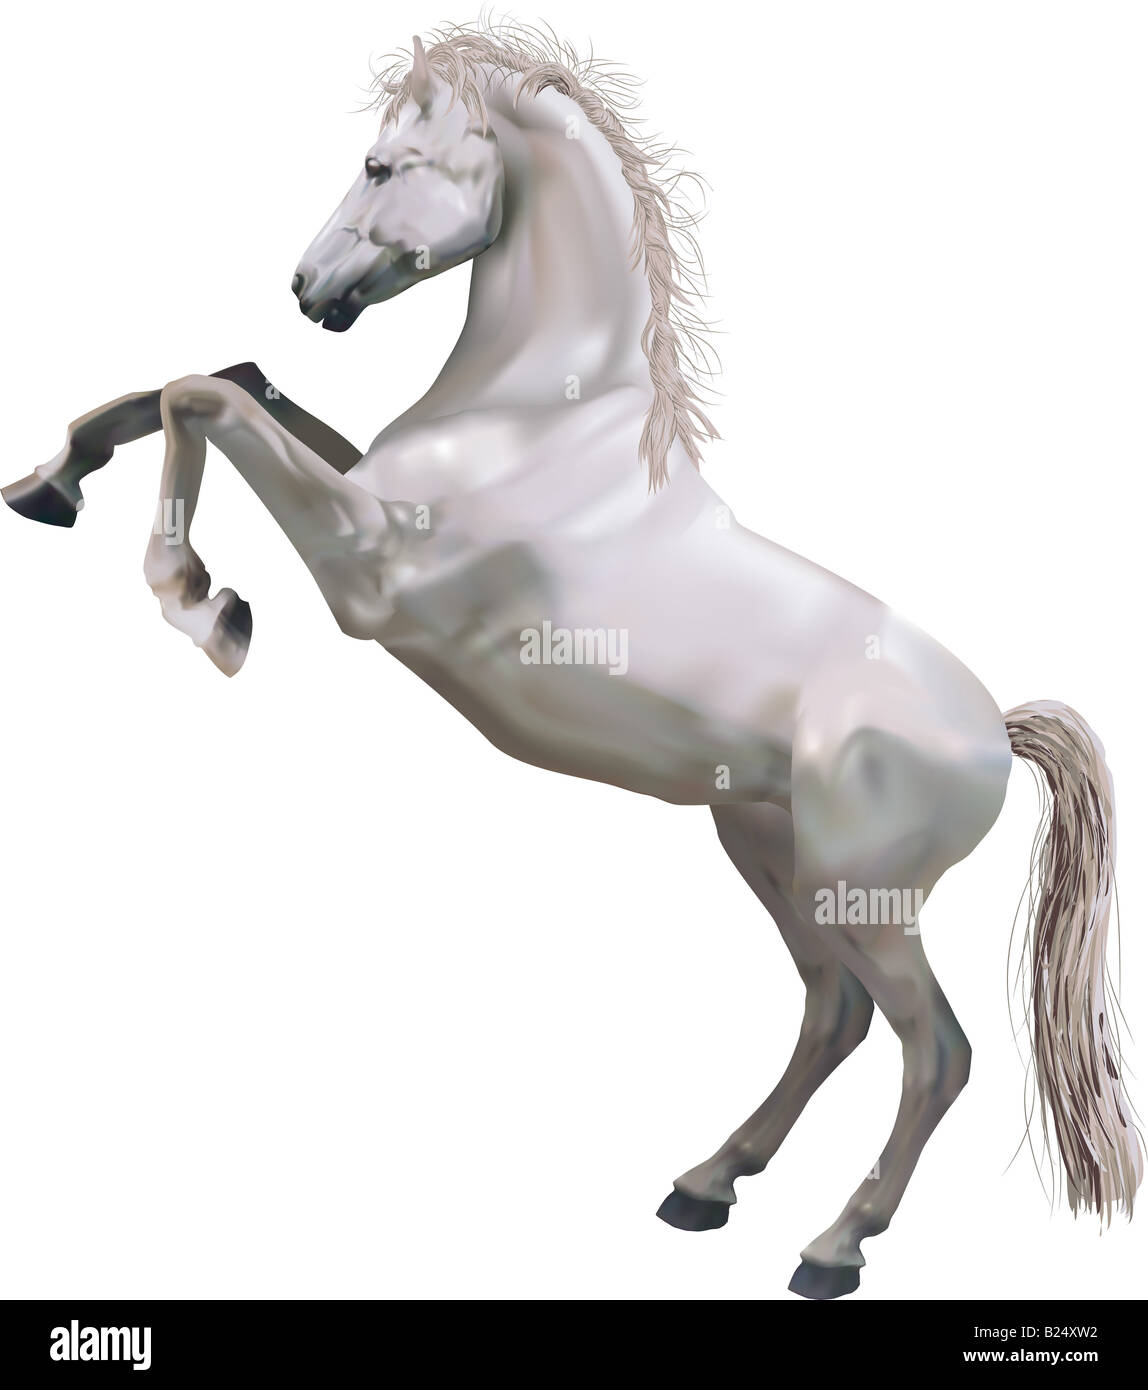 Rearing Horse. A photorealistic illustration of a horse rearing up on its hind legs. Stock Photo